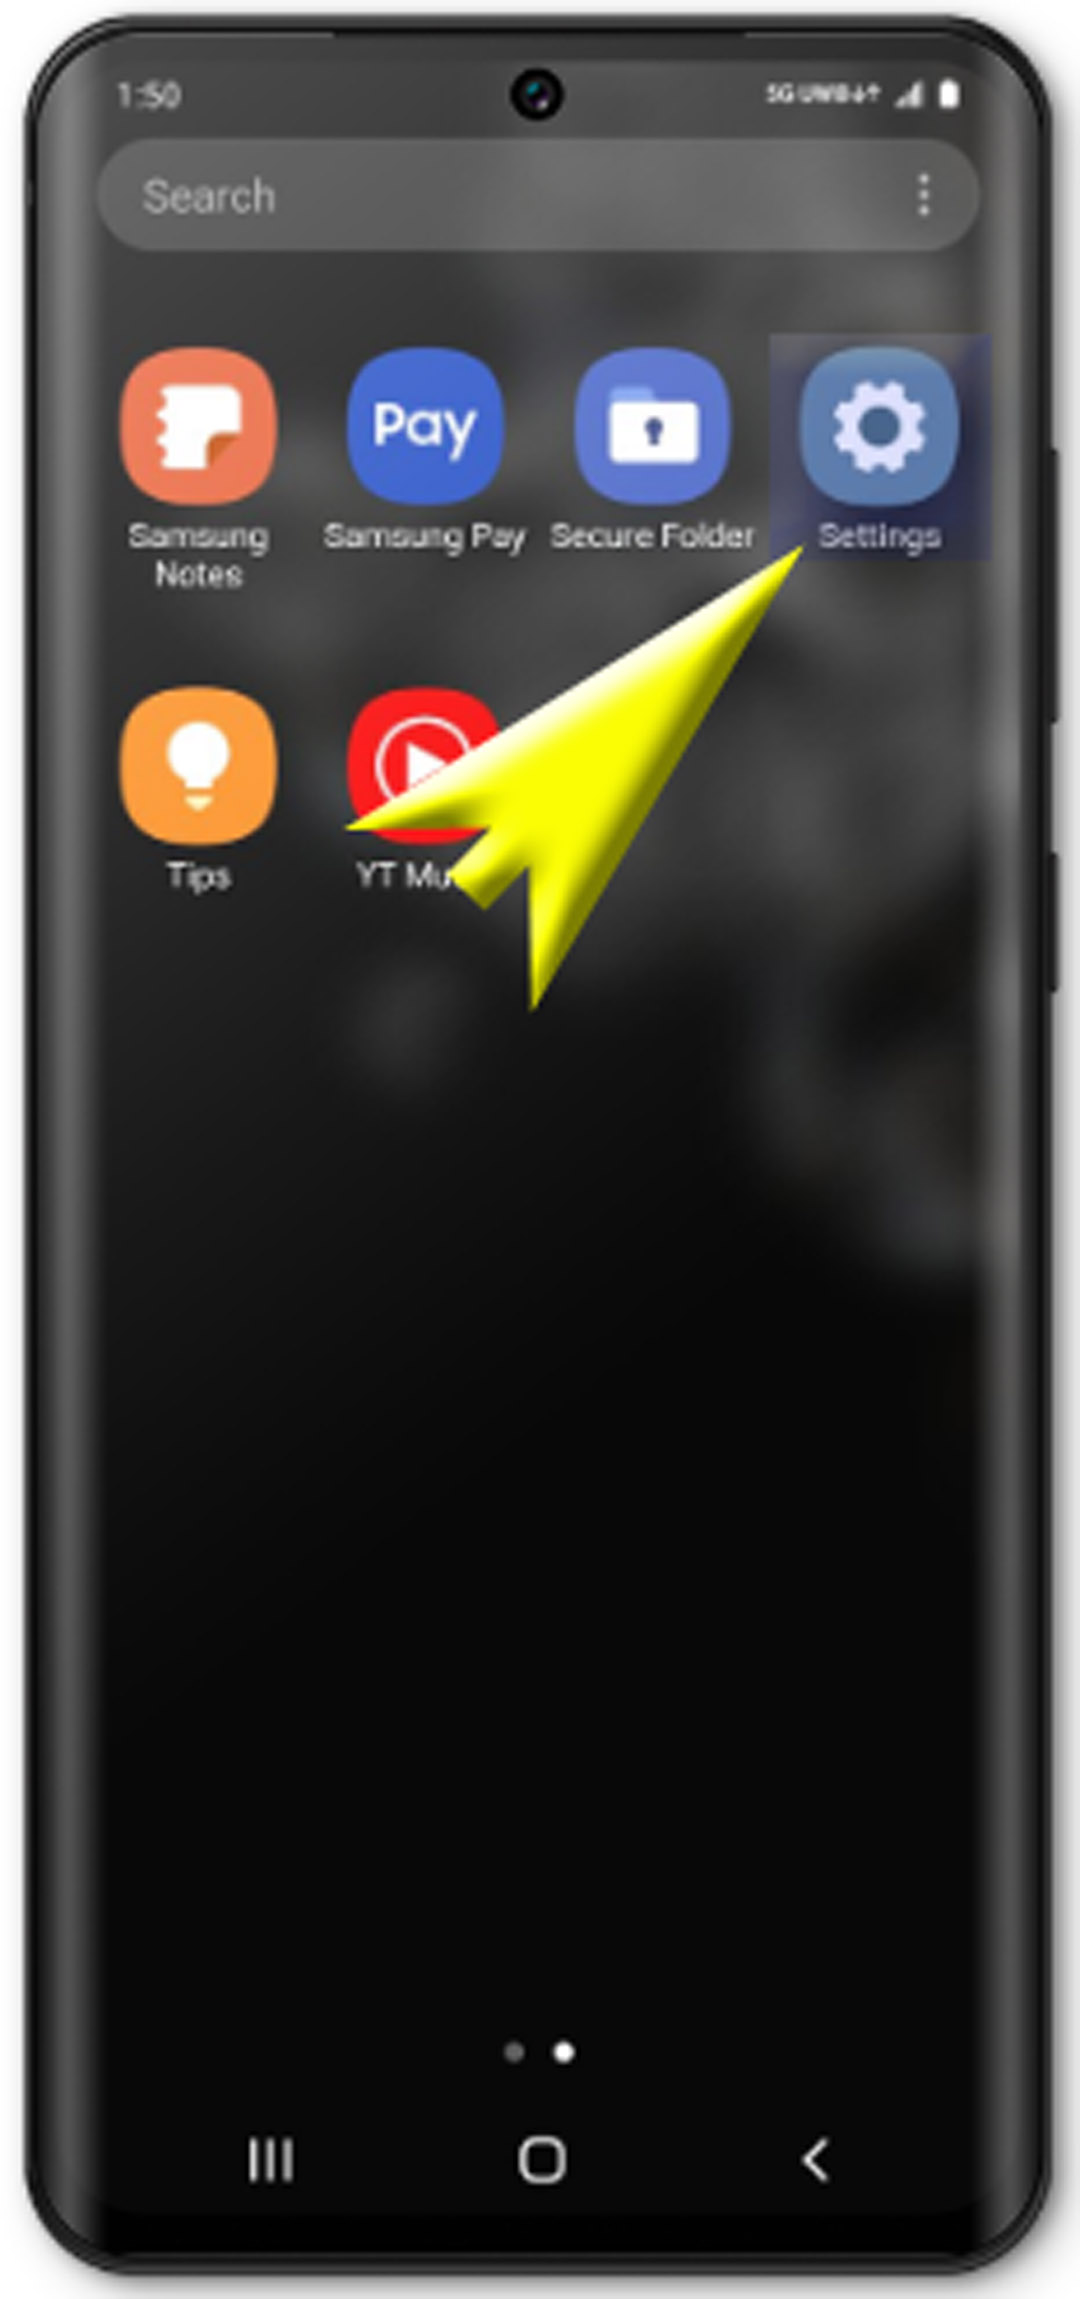 connect galaxy s20 to internet using mobile data - open settings app